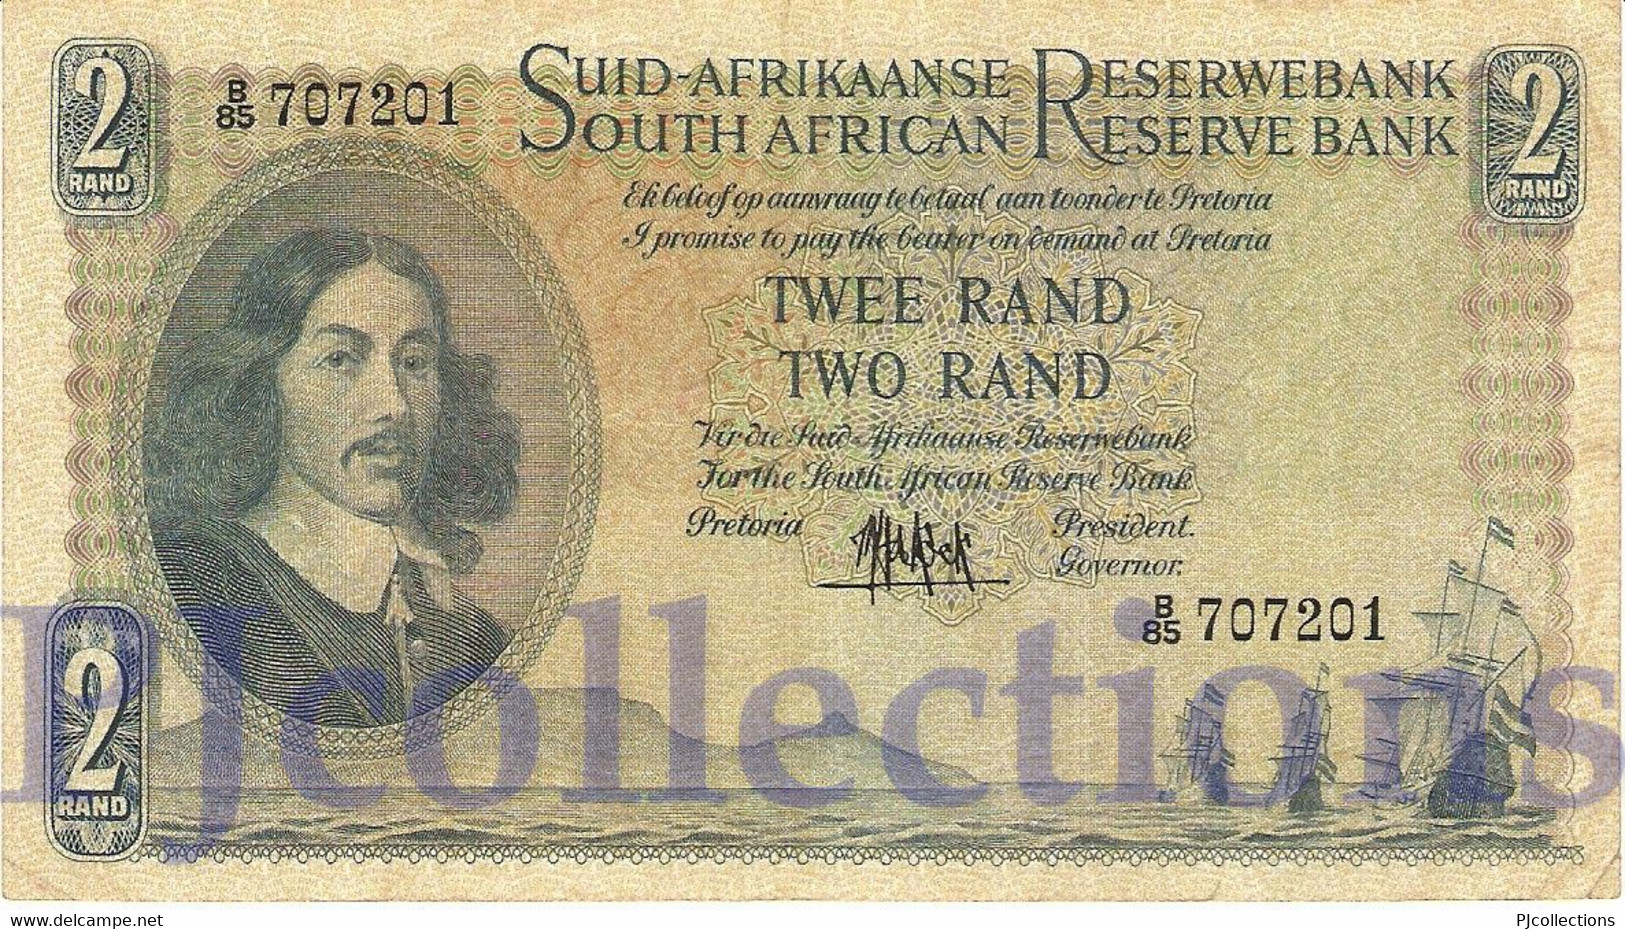 SOUTH AFRICA 2 RAND 1961 PICK 105a VF - South Africa